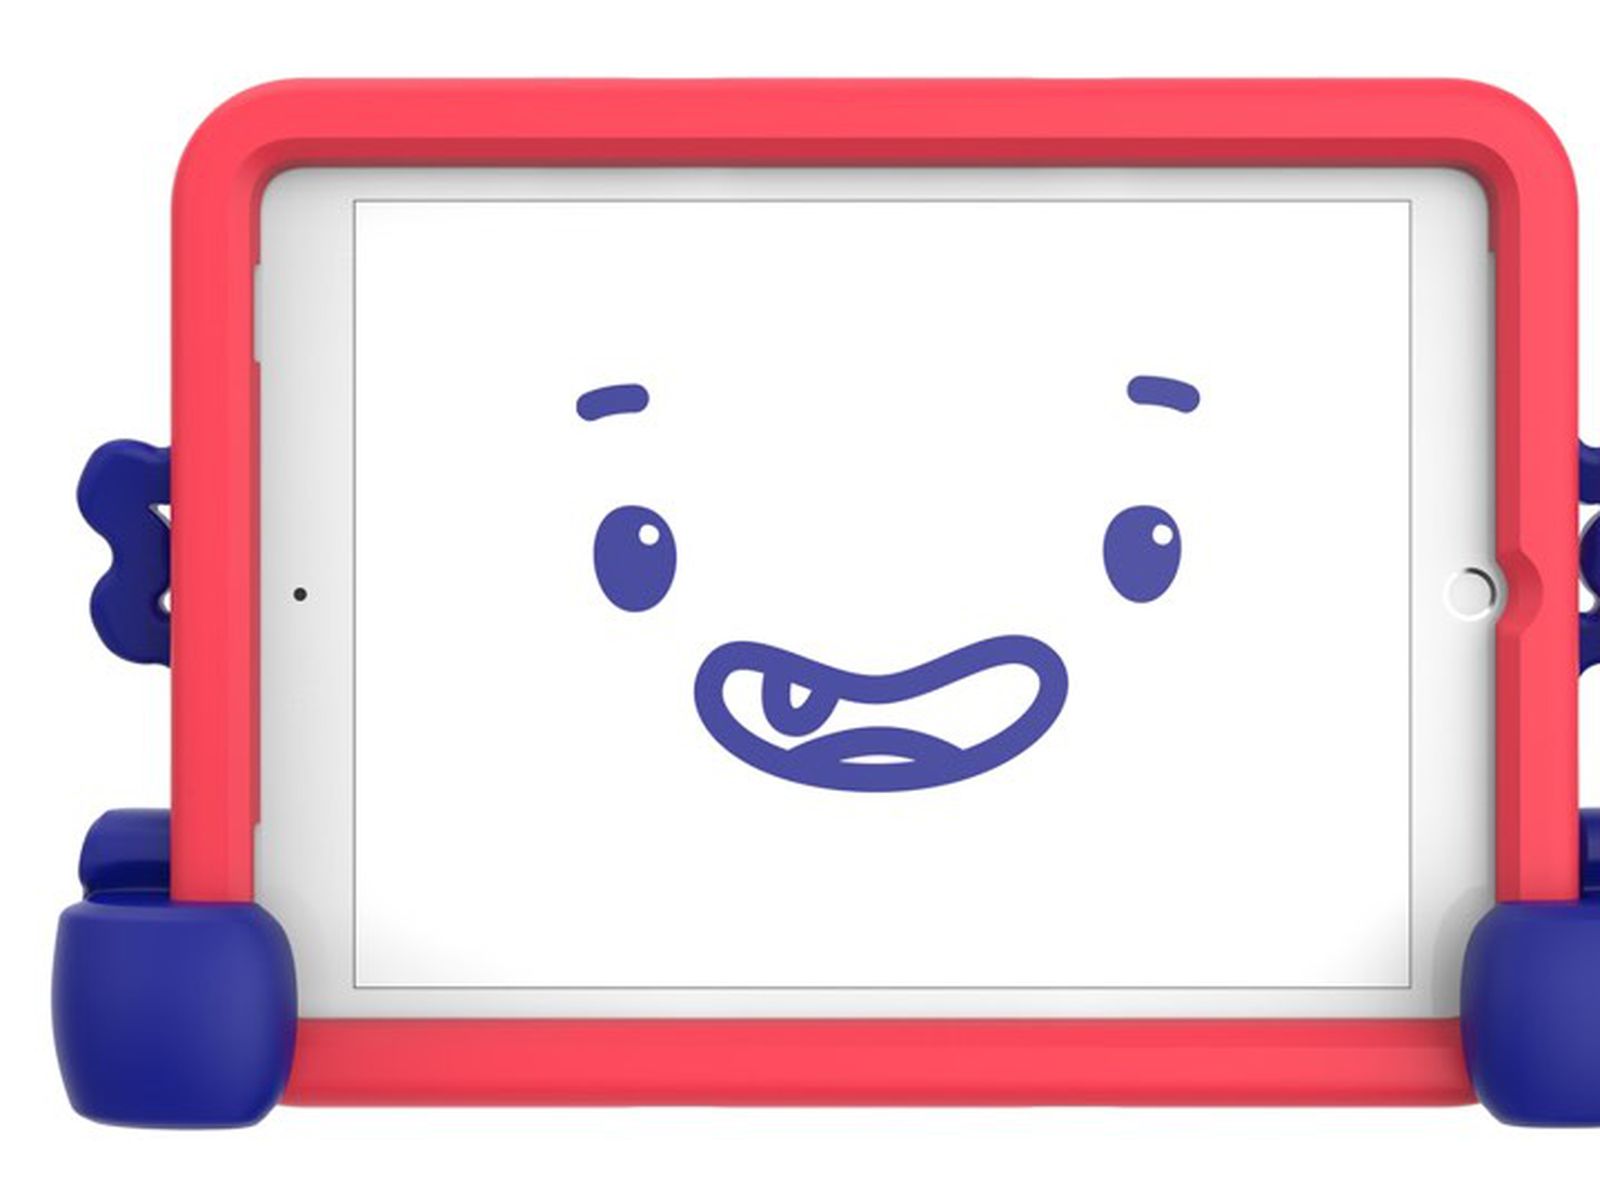 CES 2019: Speck Launches New 'Case-E' iPad Case Aimed at Kids - MacRumors